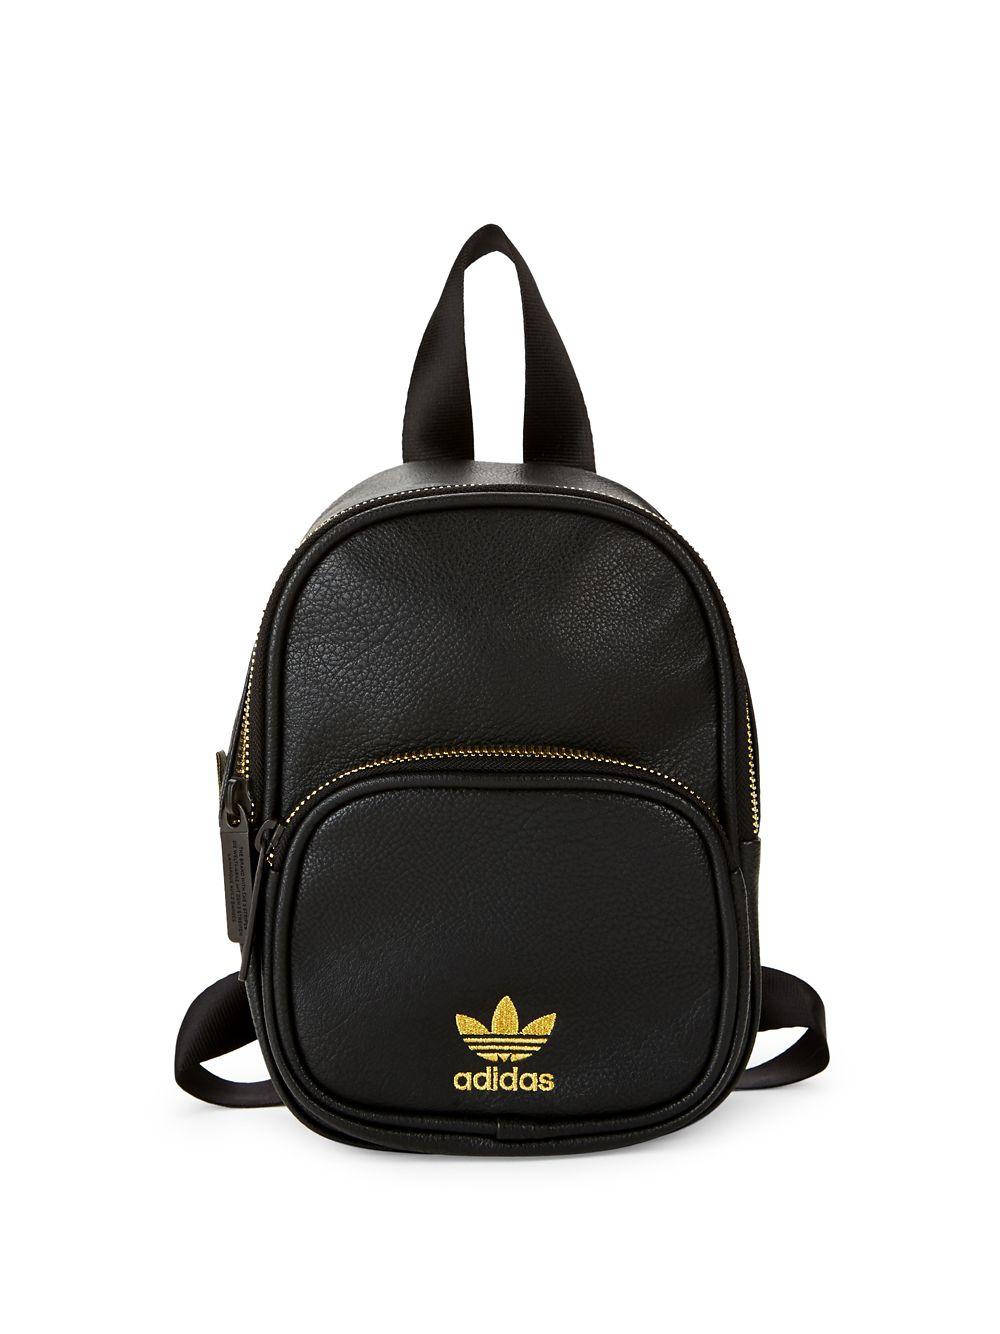 adidas Mini Faux Leather Backpack in Black - Lyst